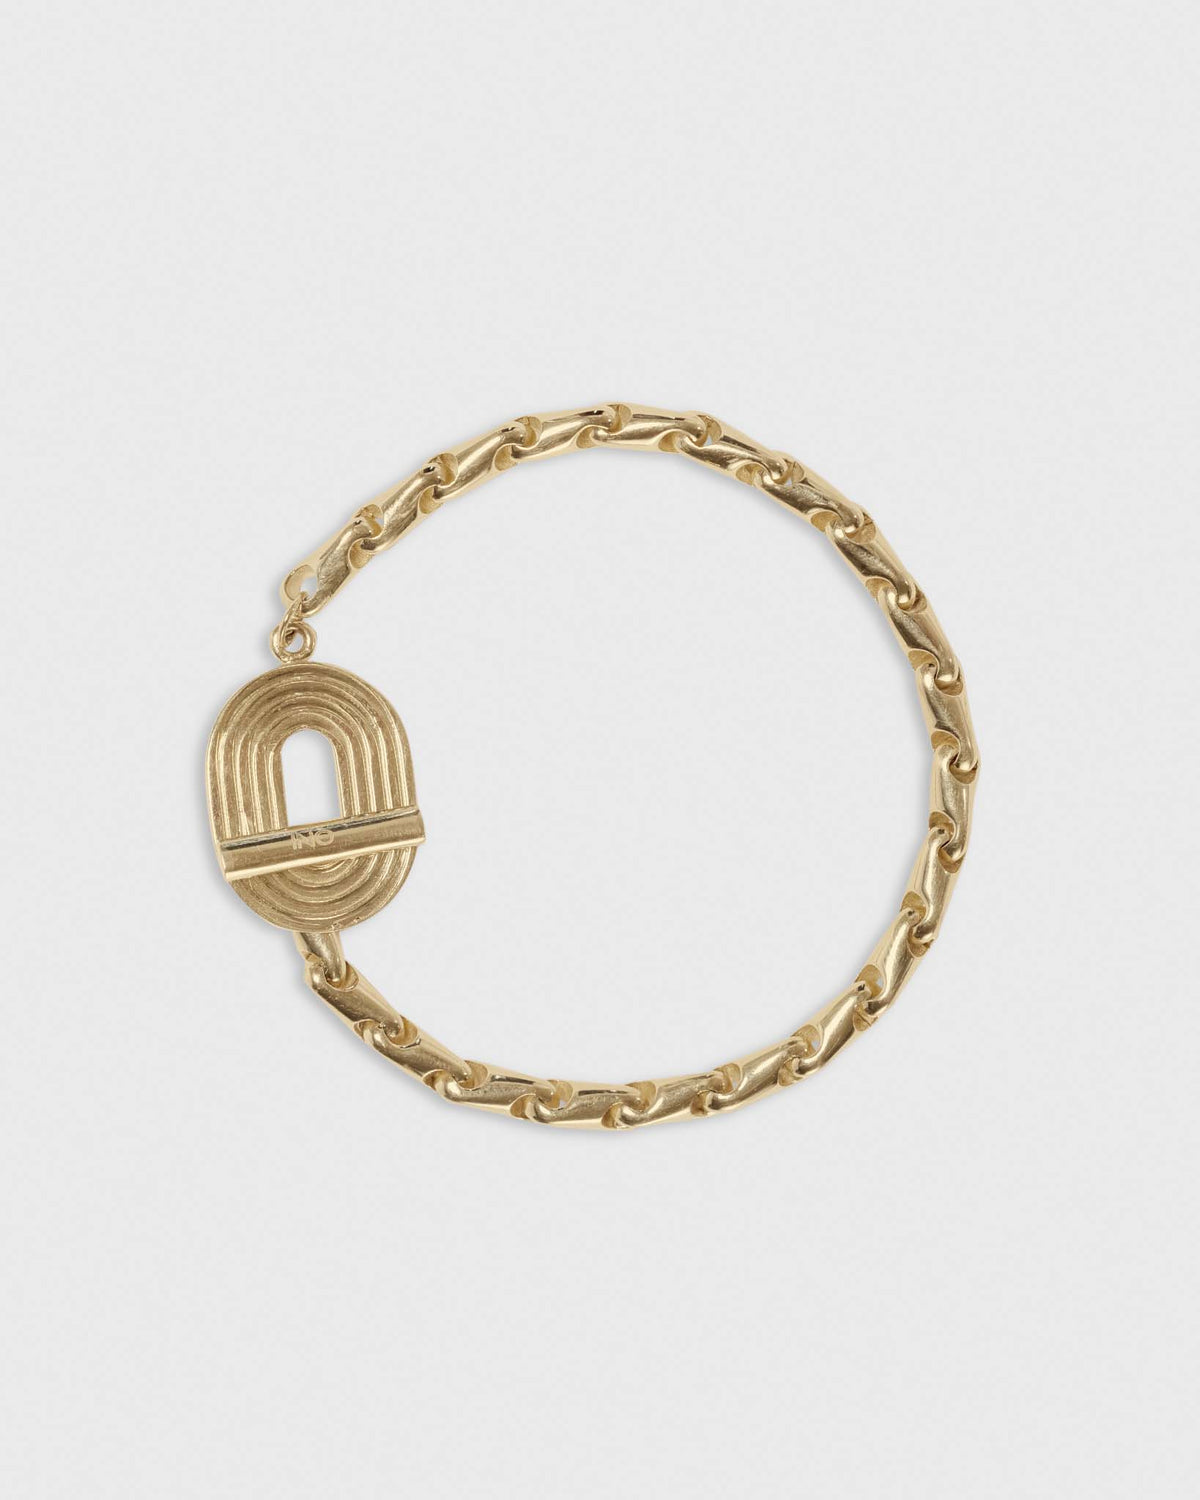 eight bracelet in solid 14k yellow gold